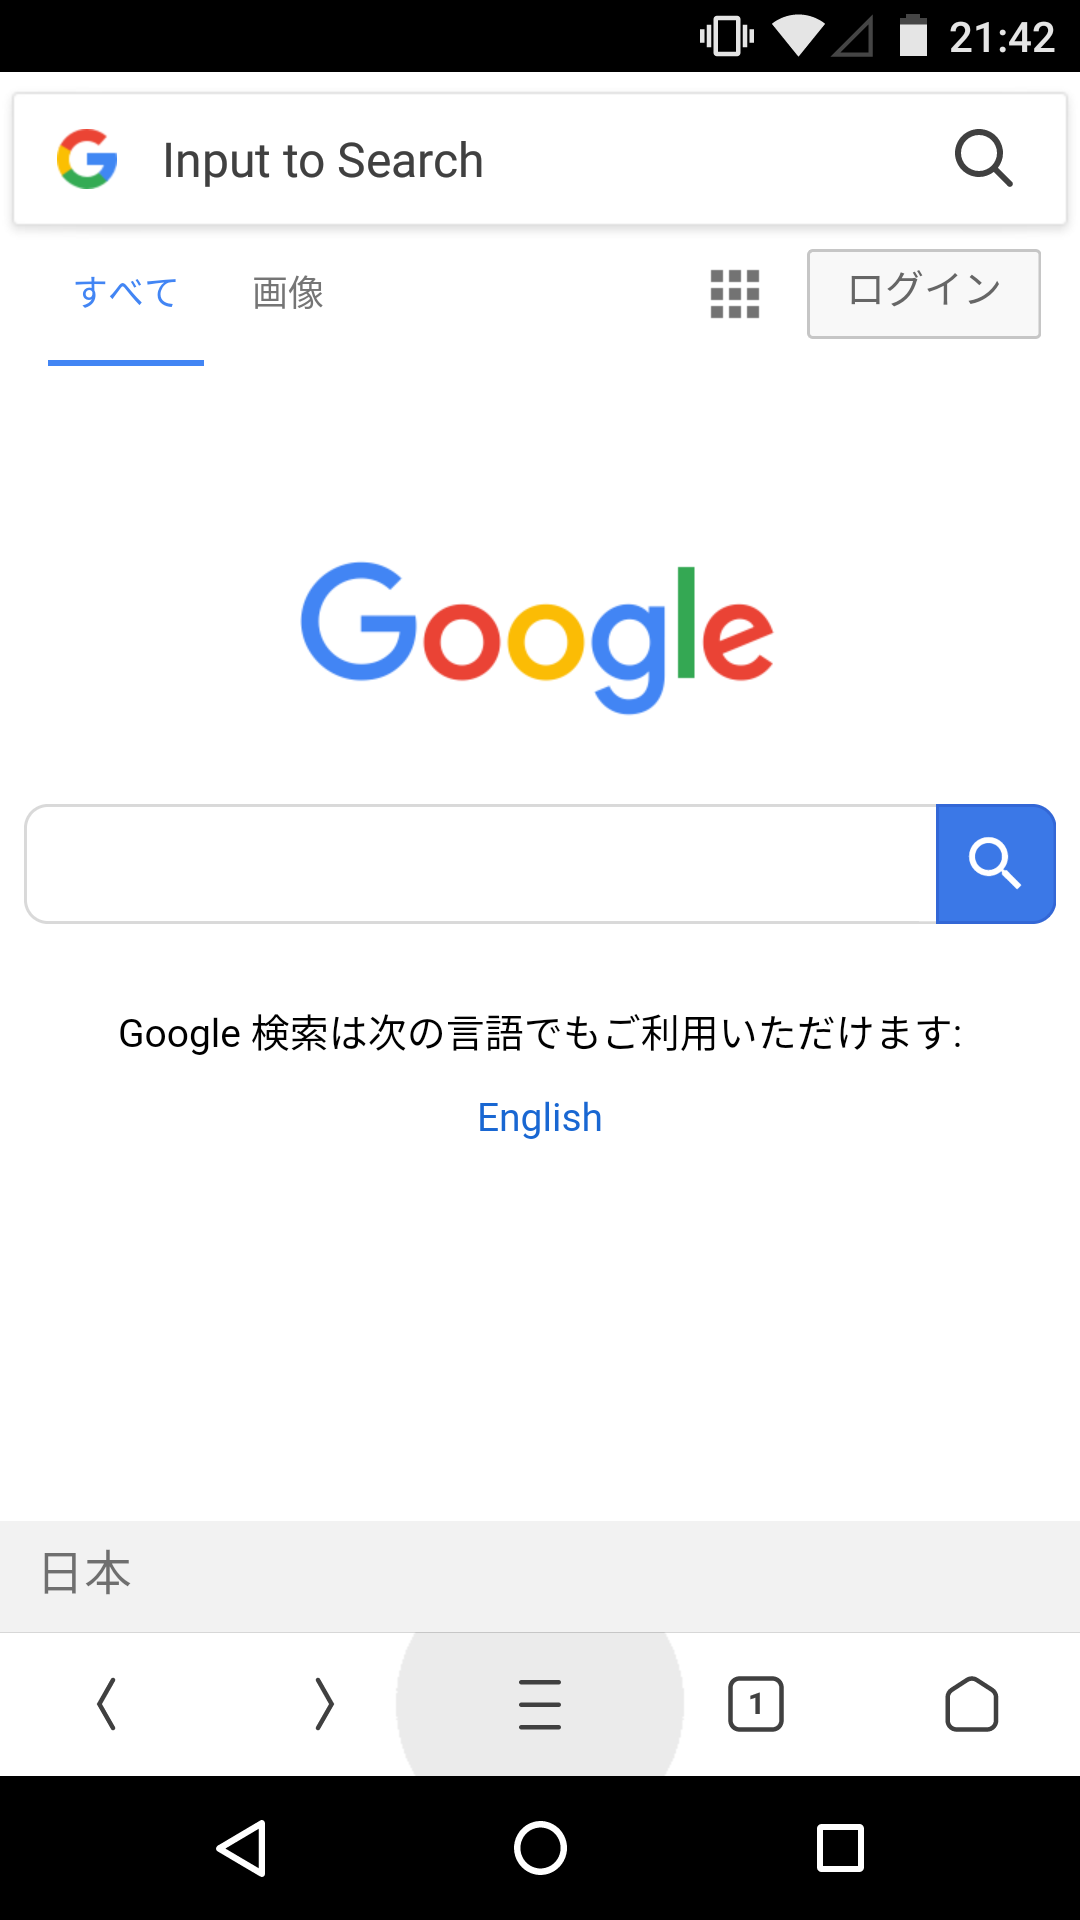 Android版 スマホ各ブラウザキャッシュクリアの方法 主要14ブラウザまとめ